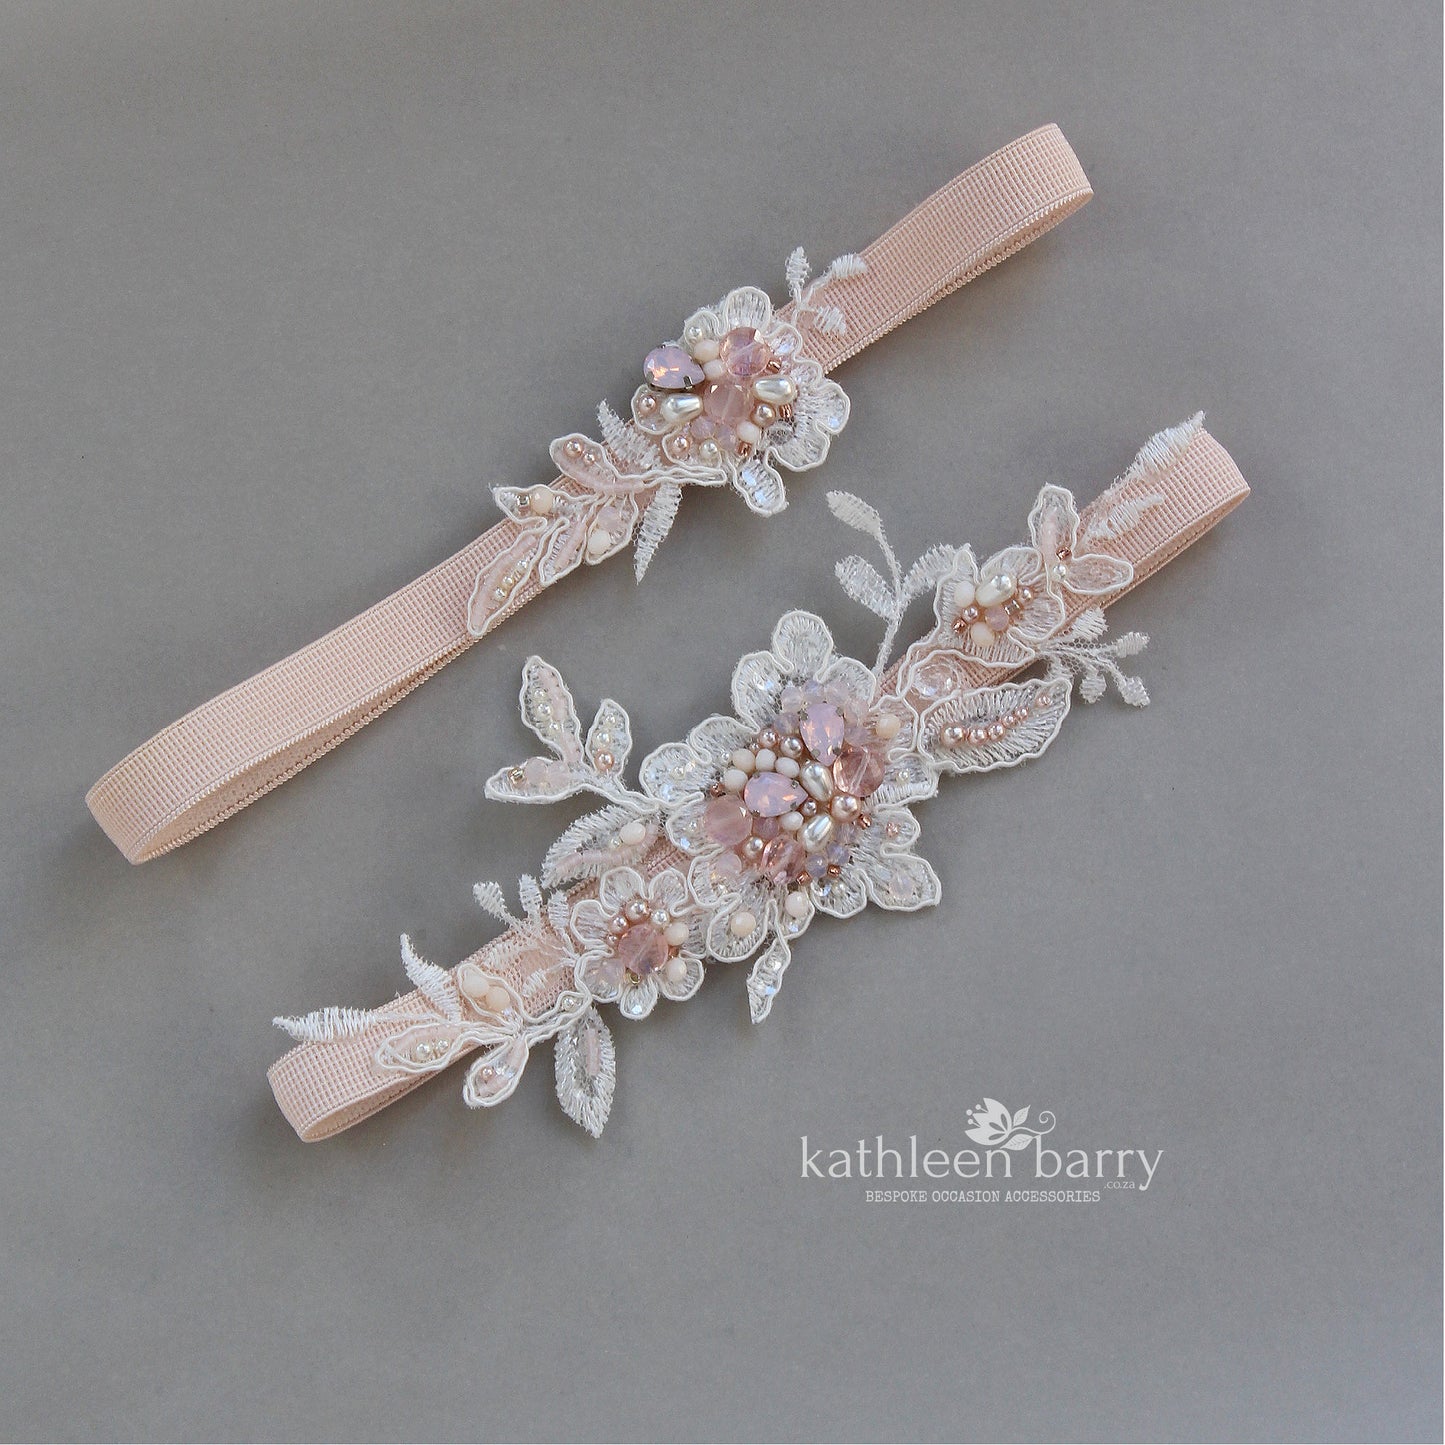 Larissa herloom Lacel garter set of two or individually - Opalescent Rhinestone, crystal and pearl FROM